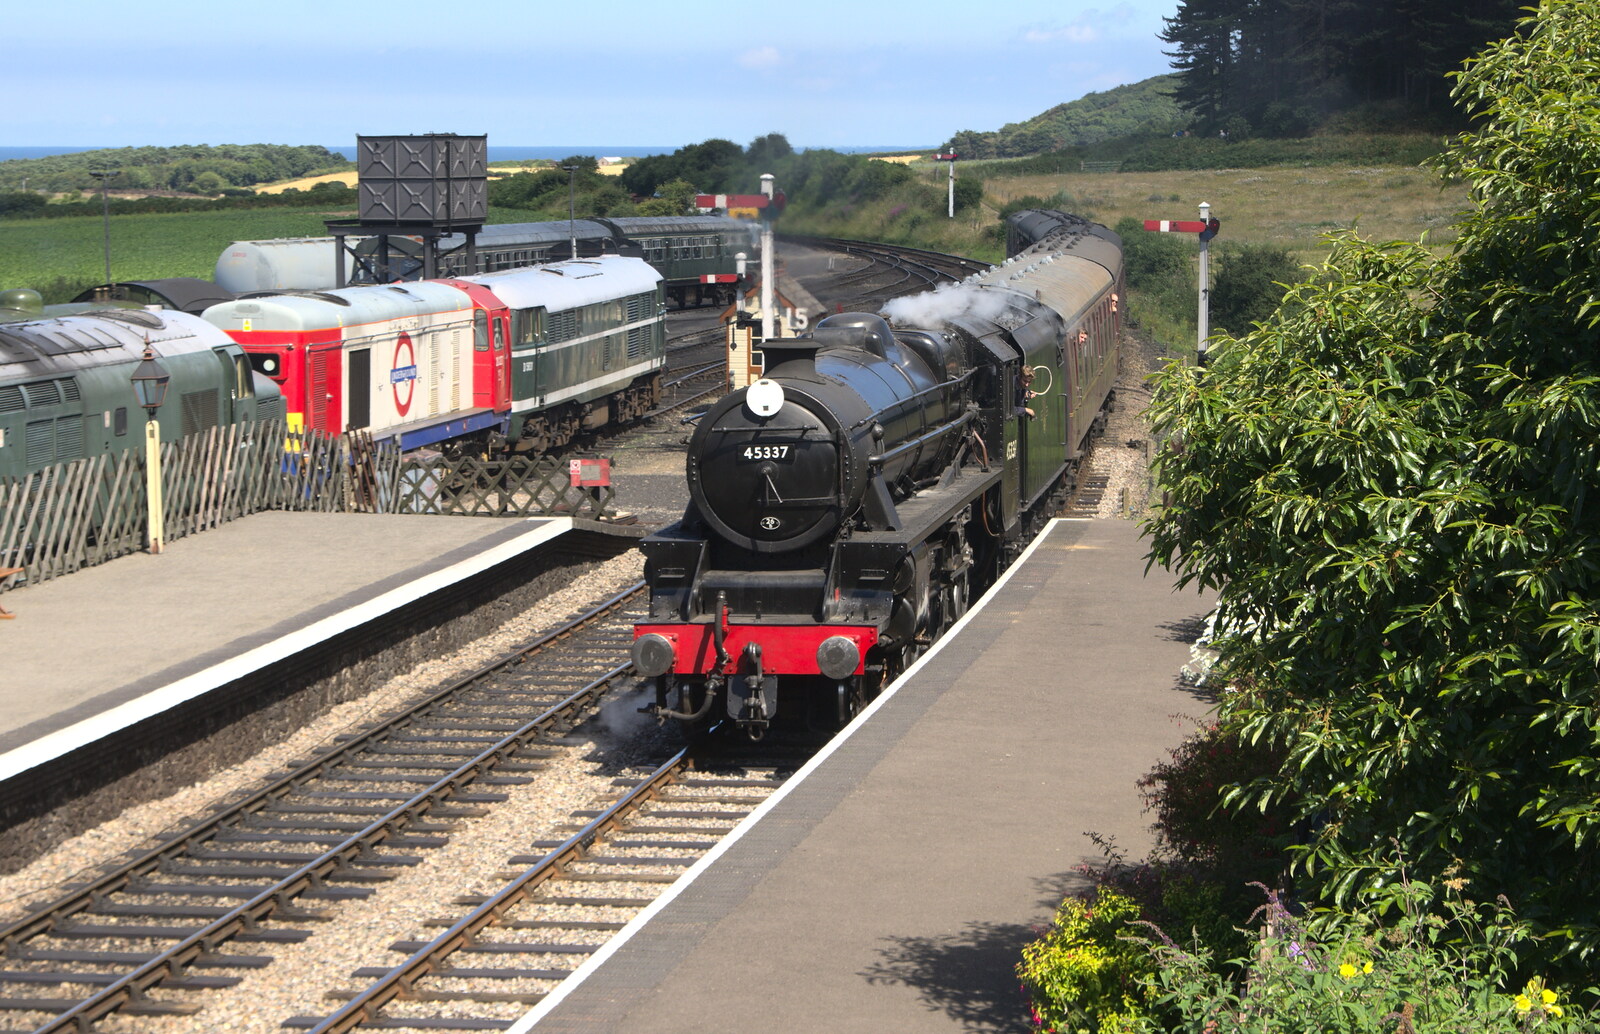 Black 5 loco 45337 comes into Weybourne from Sheringham Steam, Sheringham, North Norfolk - 31st July 2016